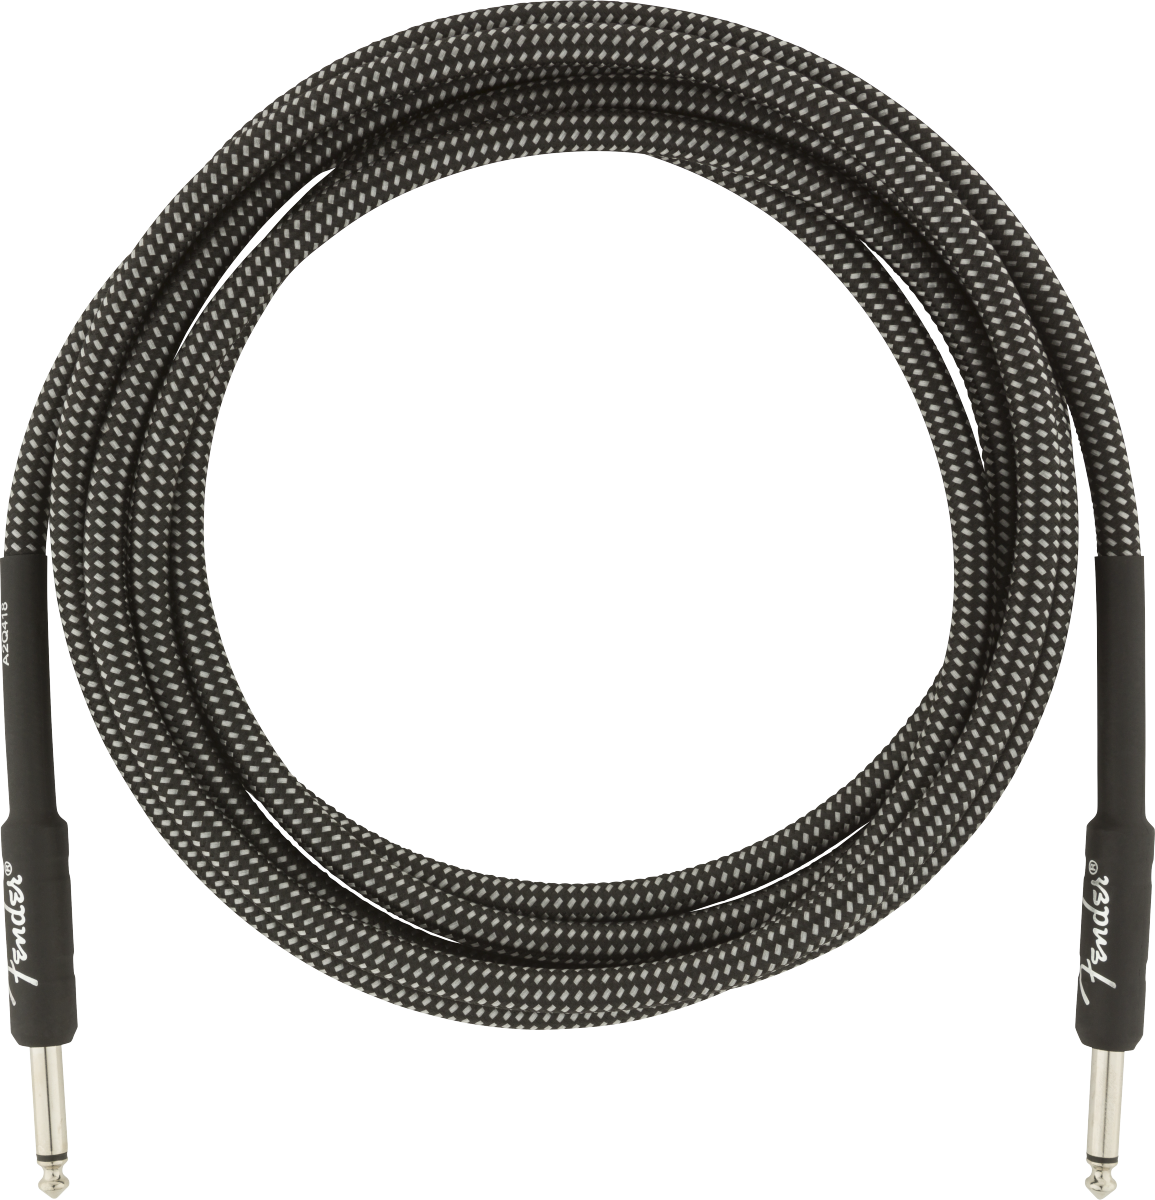 Fender Professional Series Instrument Cables, 10', Gray Tweed